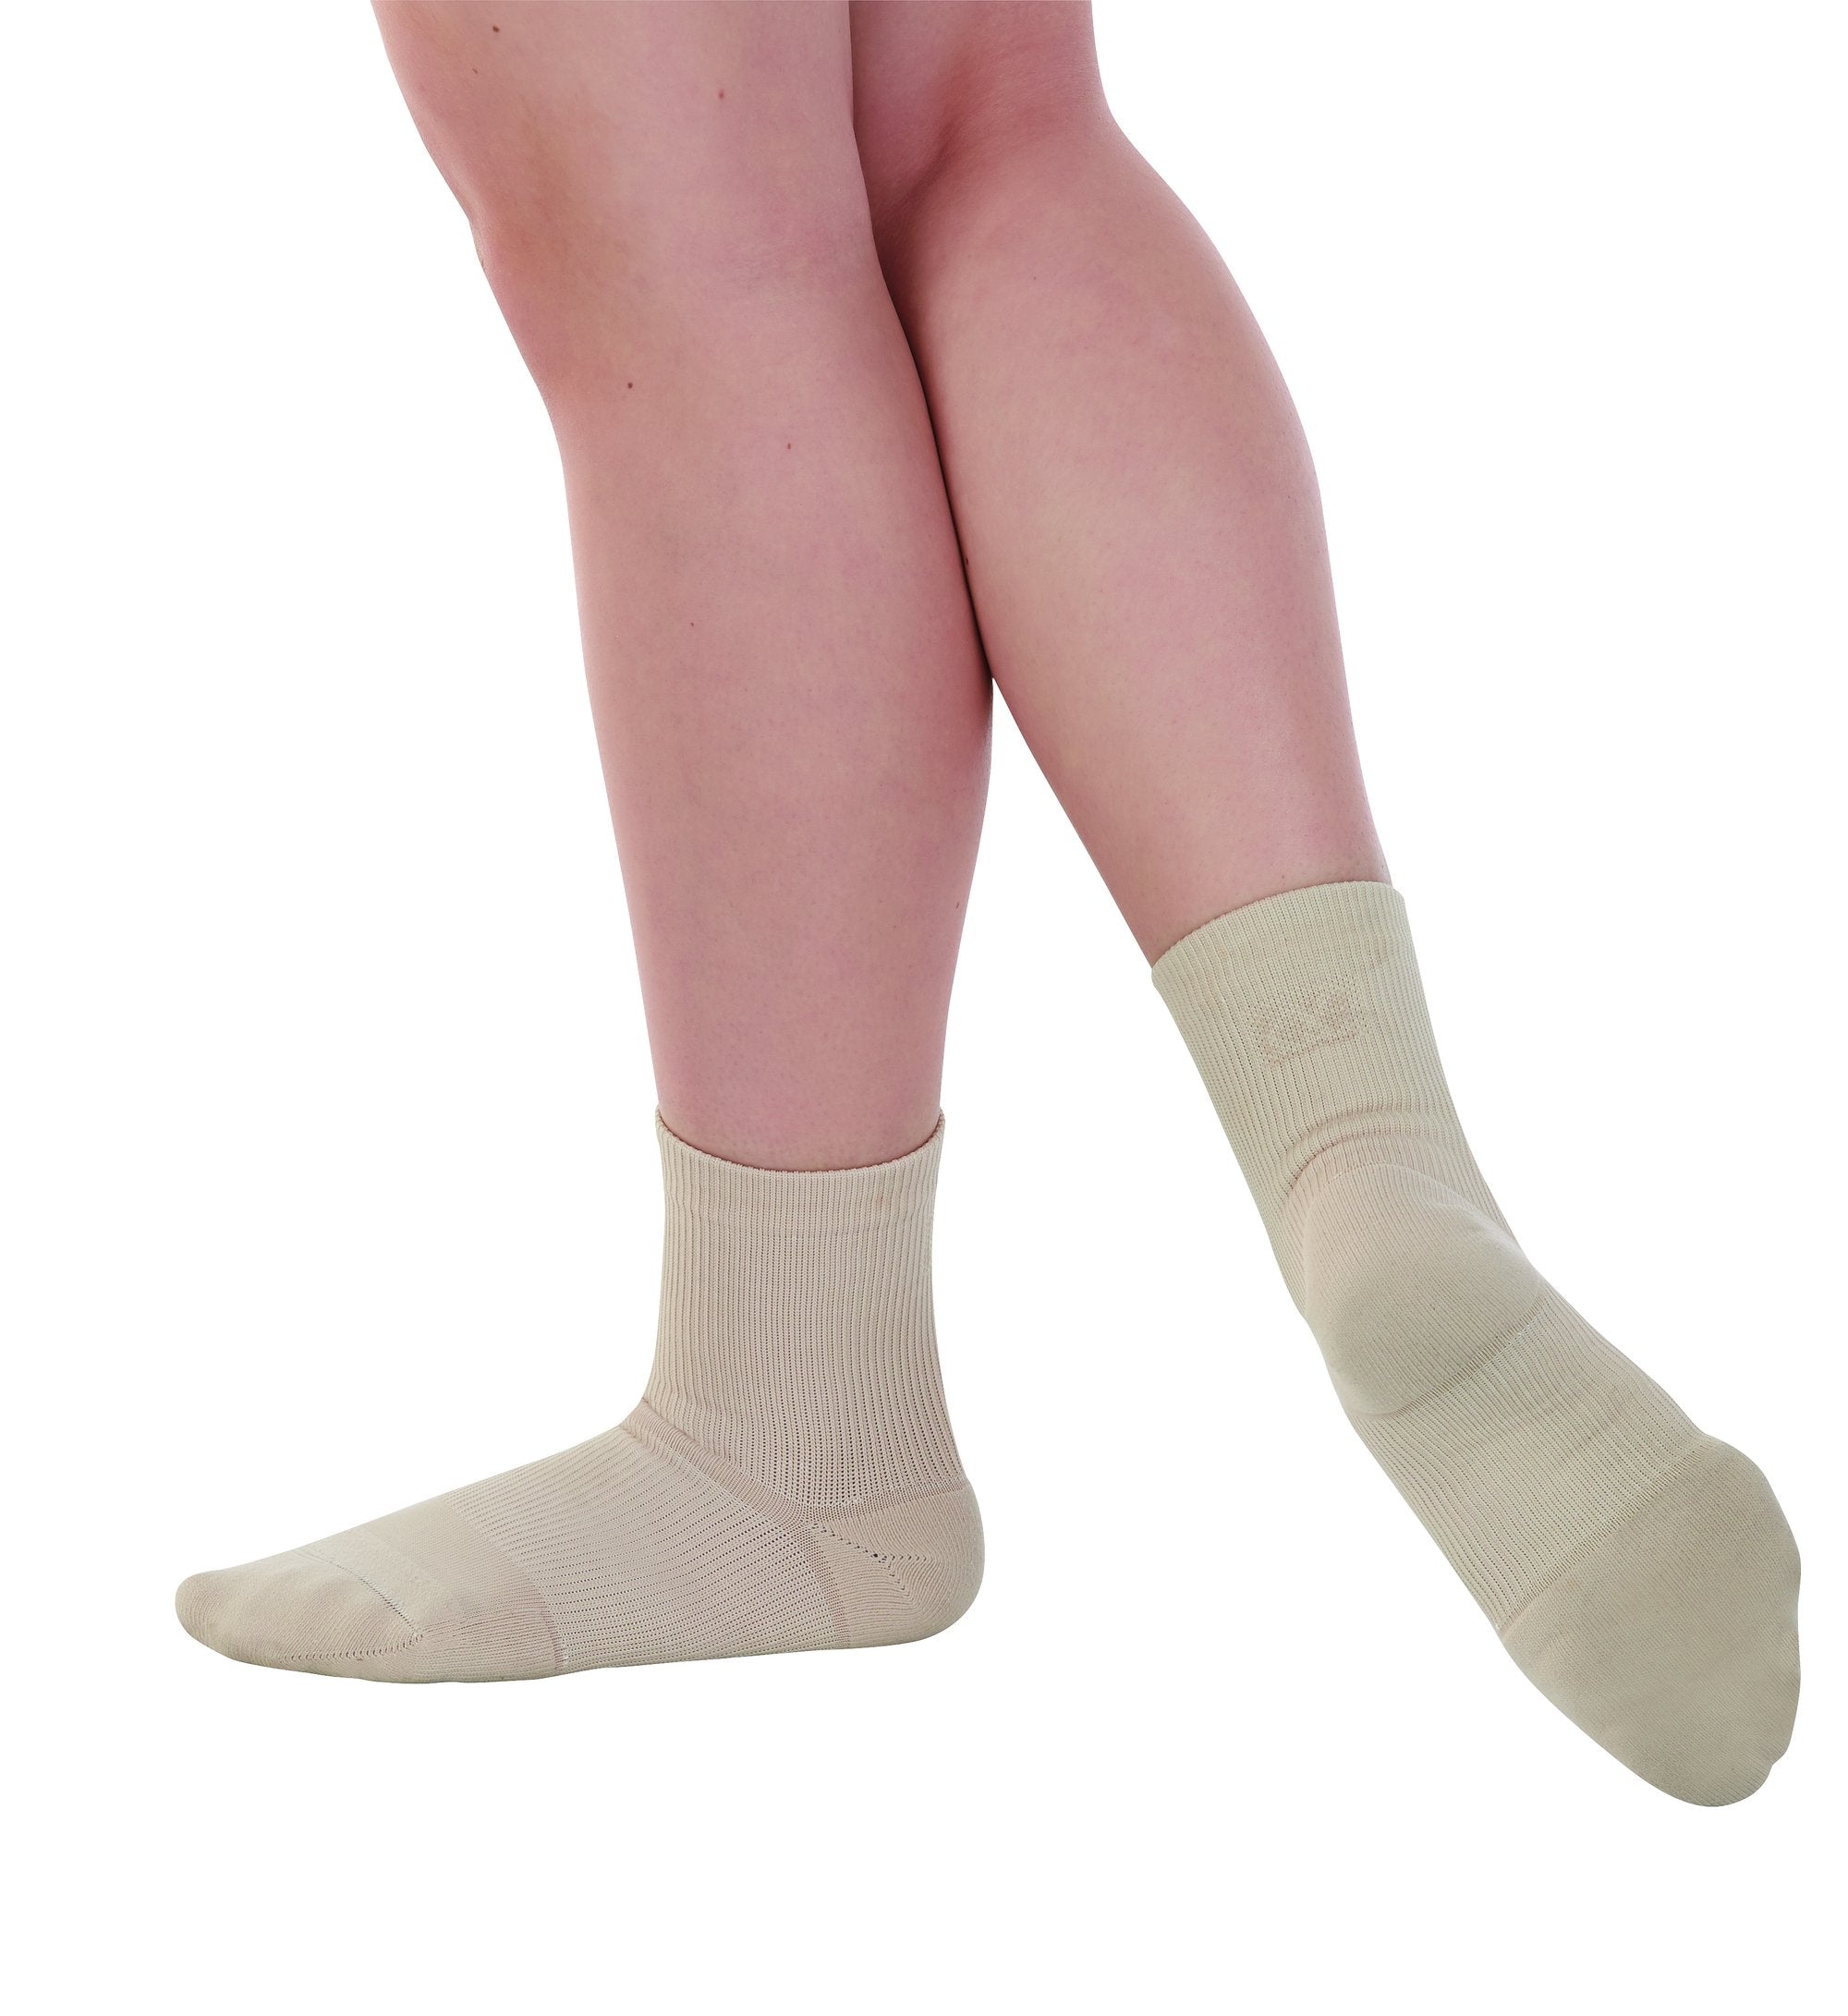 How Long Should you Wear Compression Socks? – Apolla Performance Wear